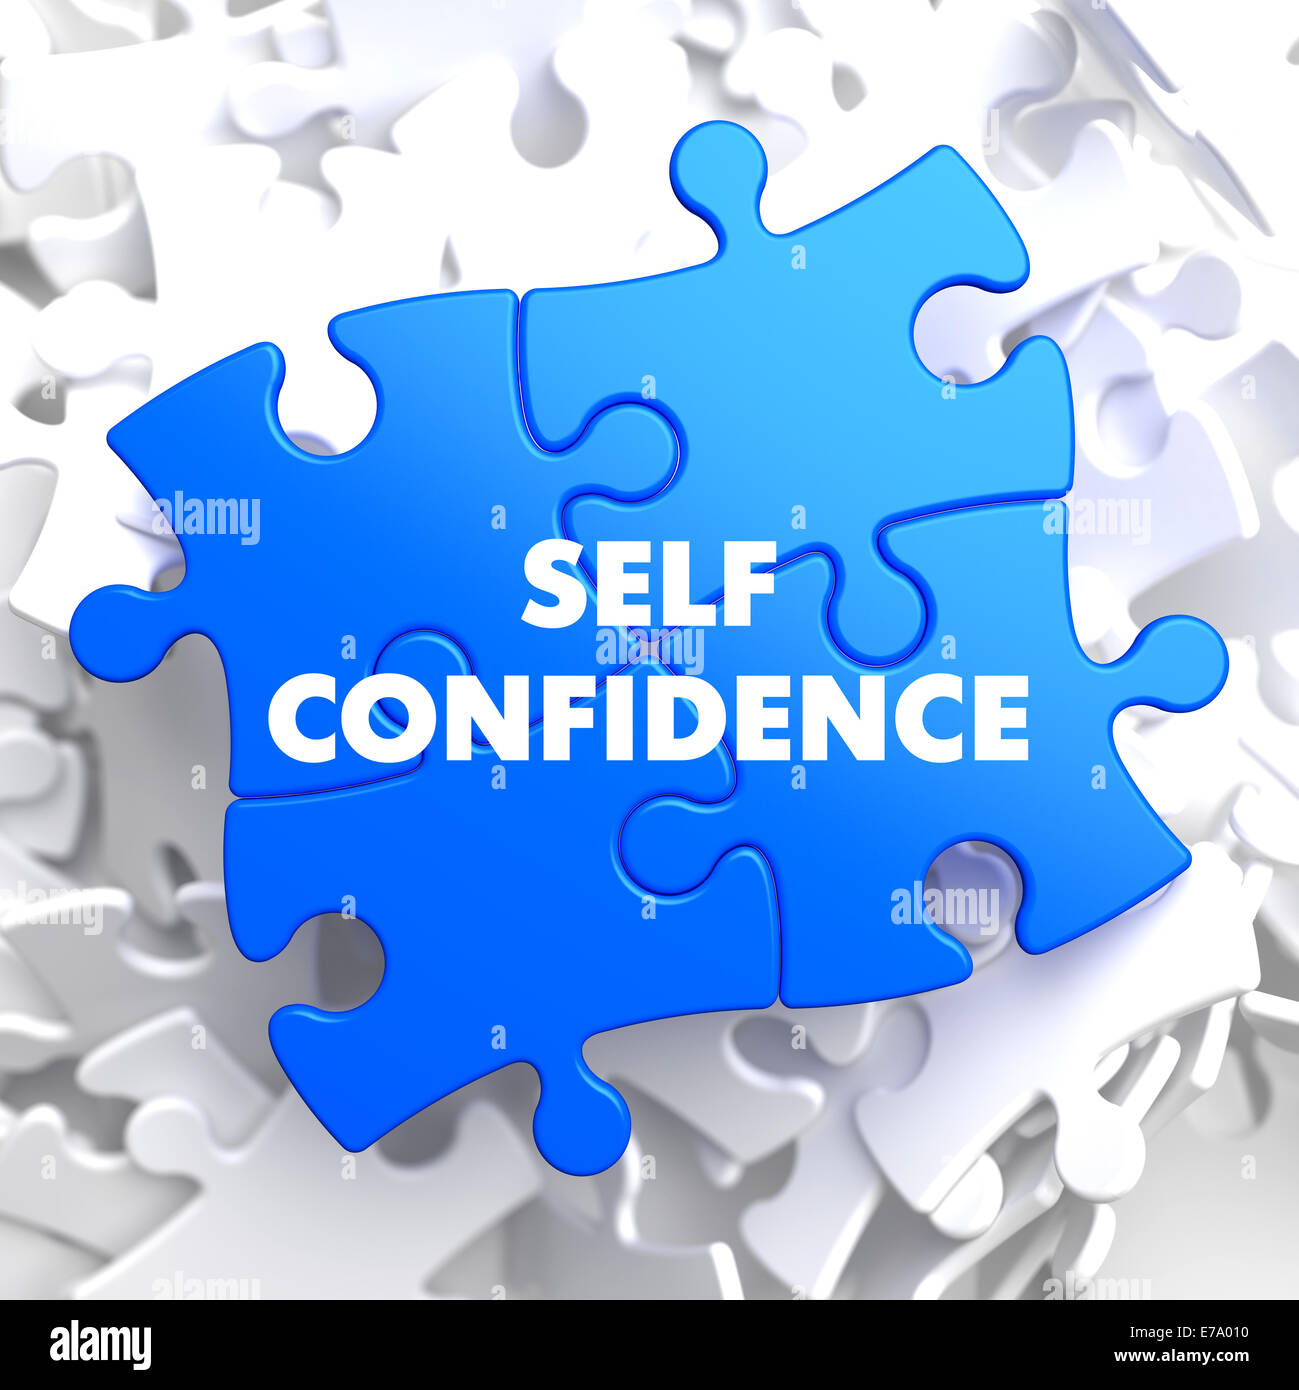 Self Confidence on Blue Puzzle. Stock Photo